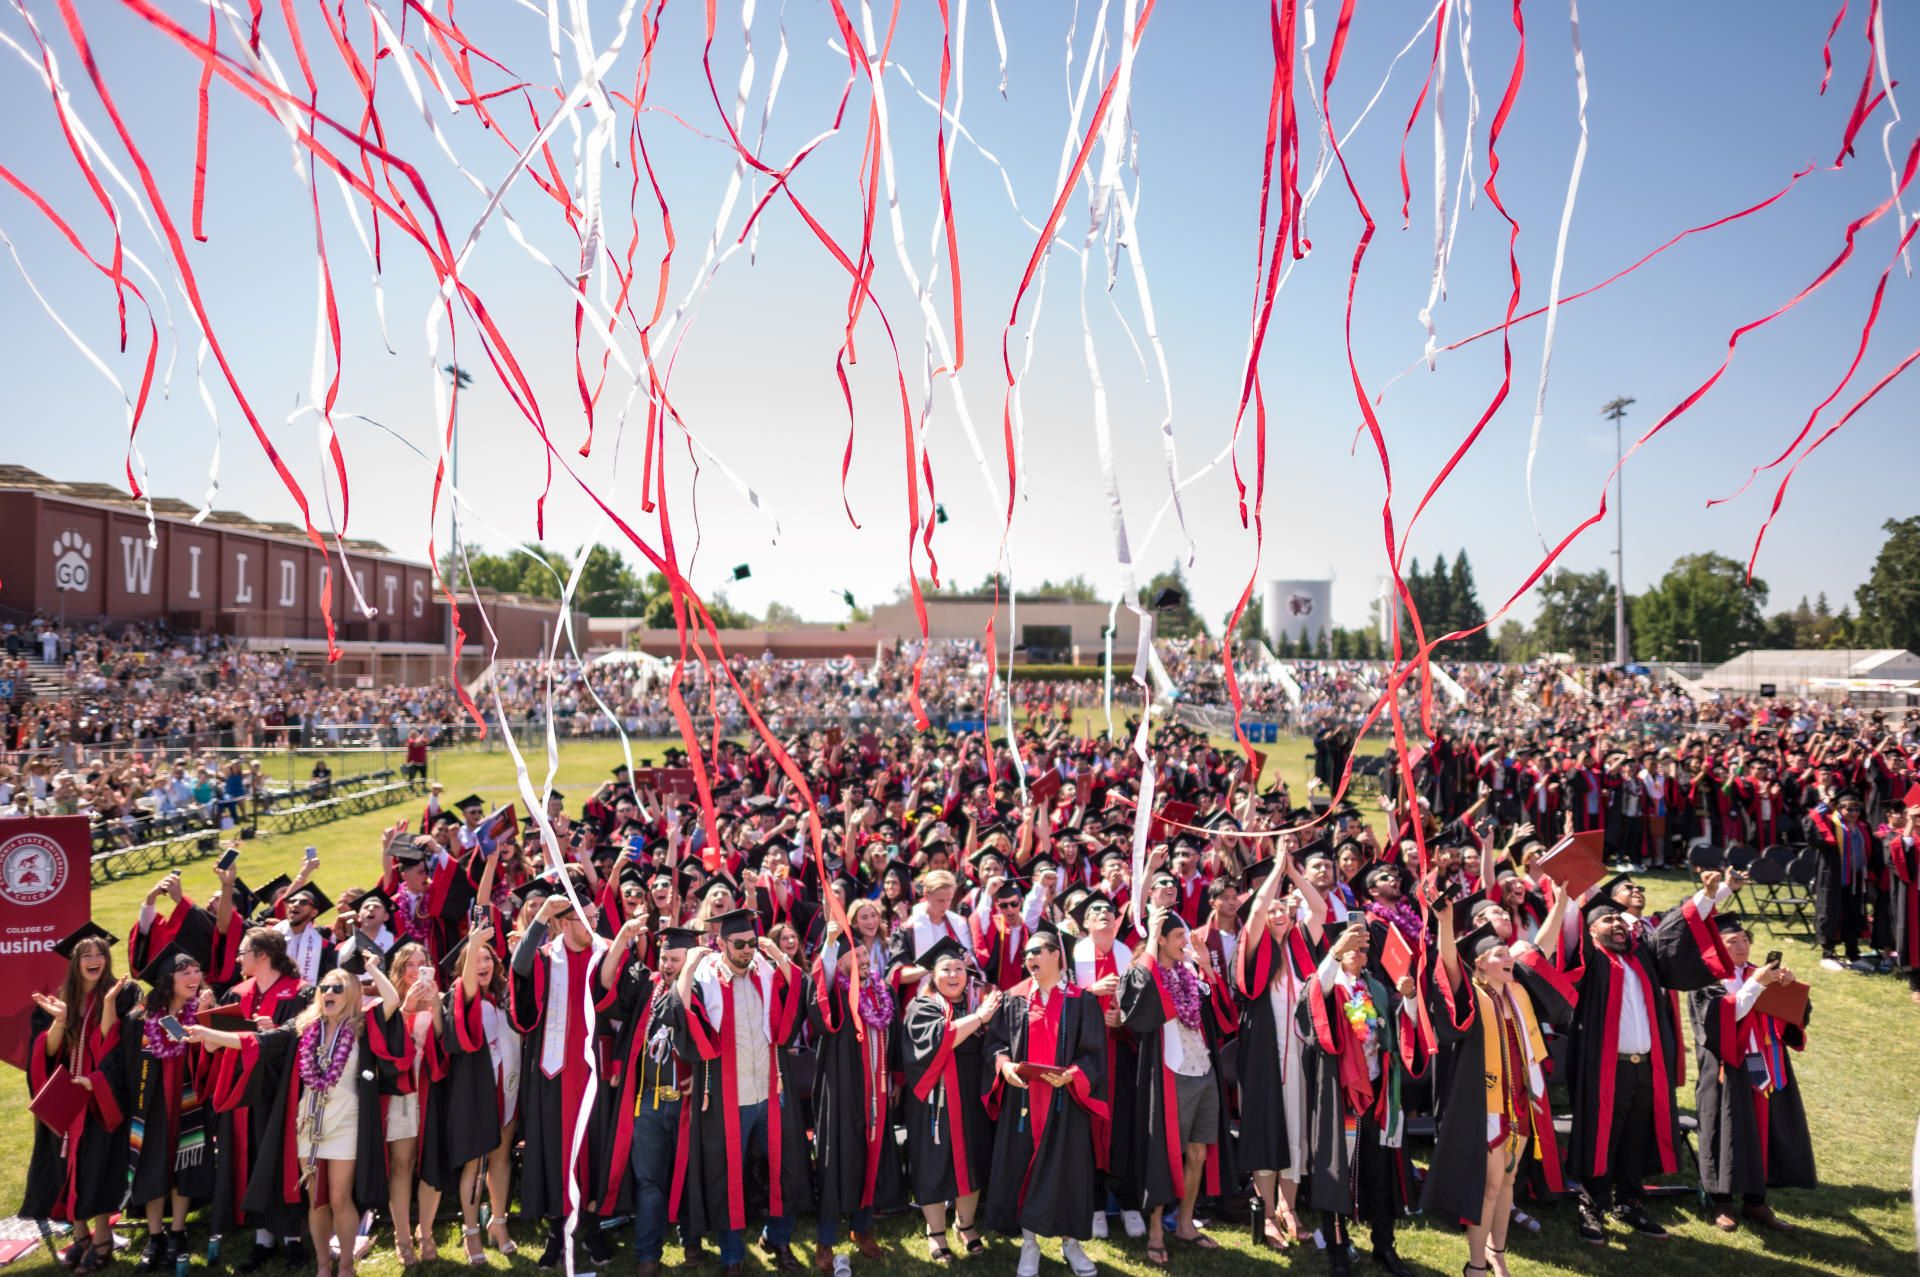 Streamers fall over a large group of college graduates during a commencement ceremony.